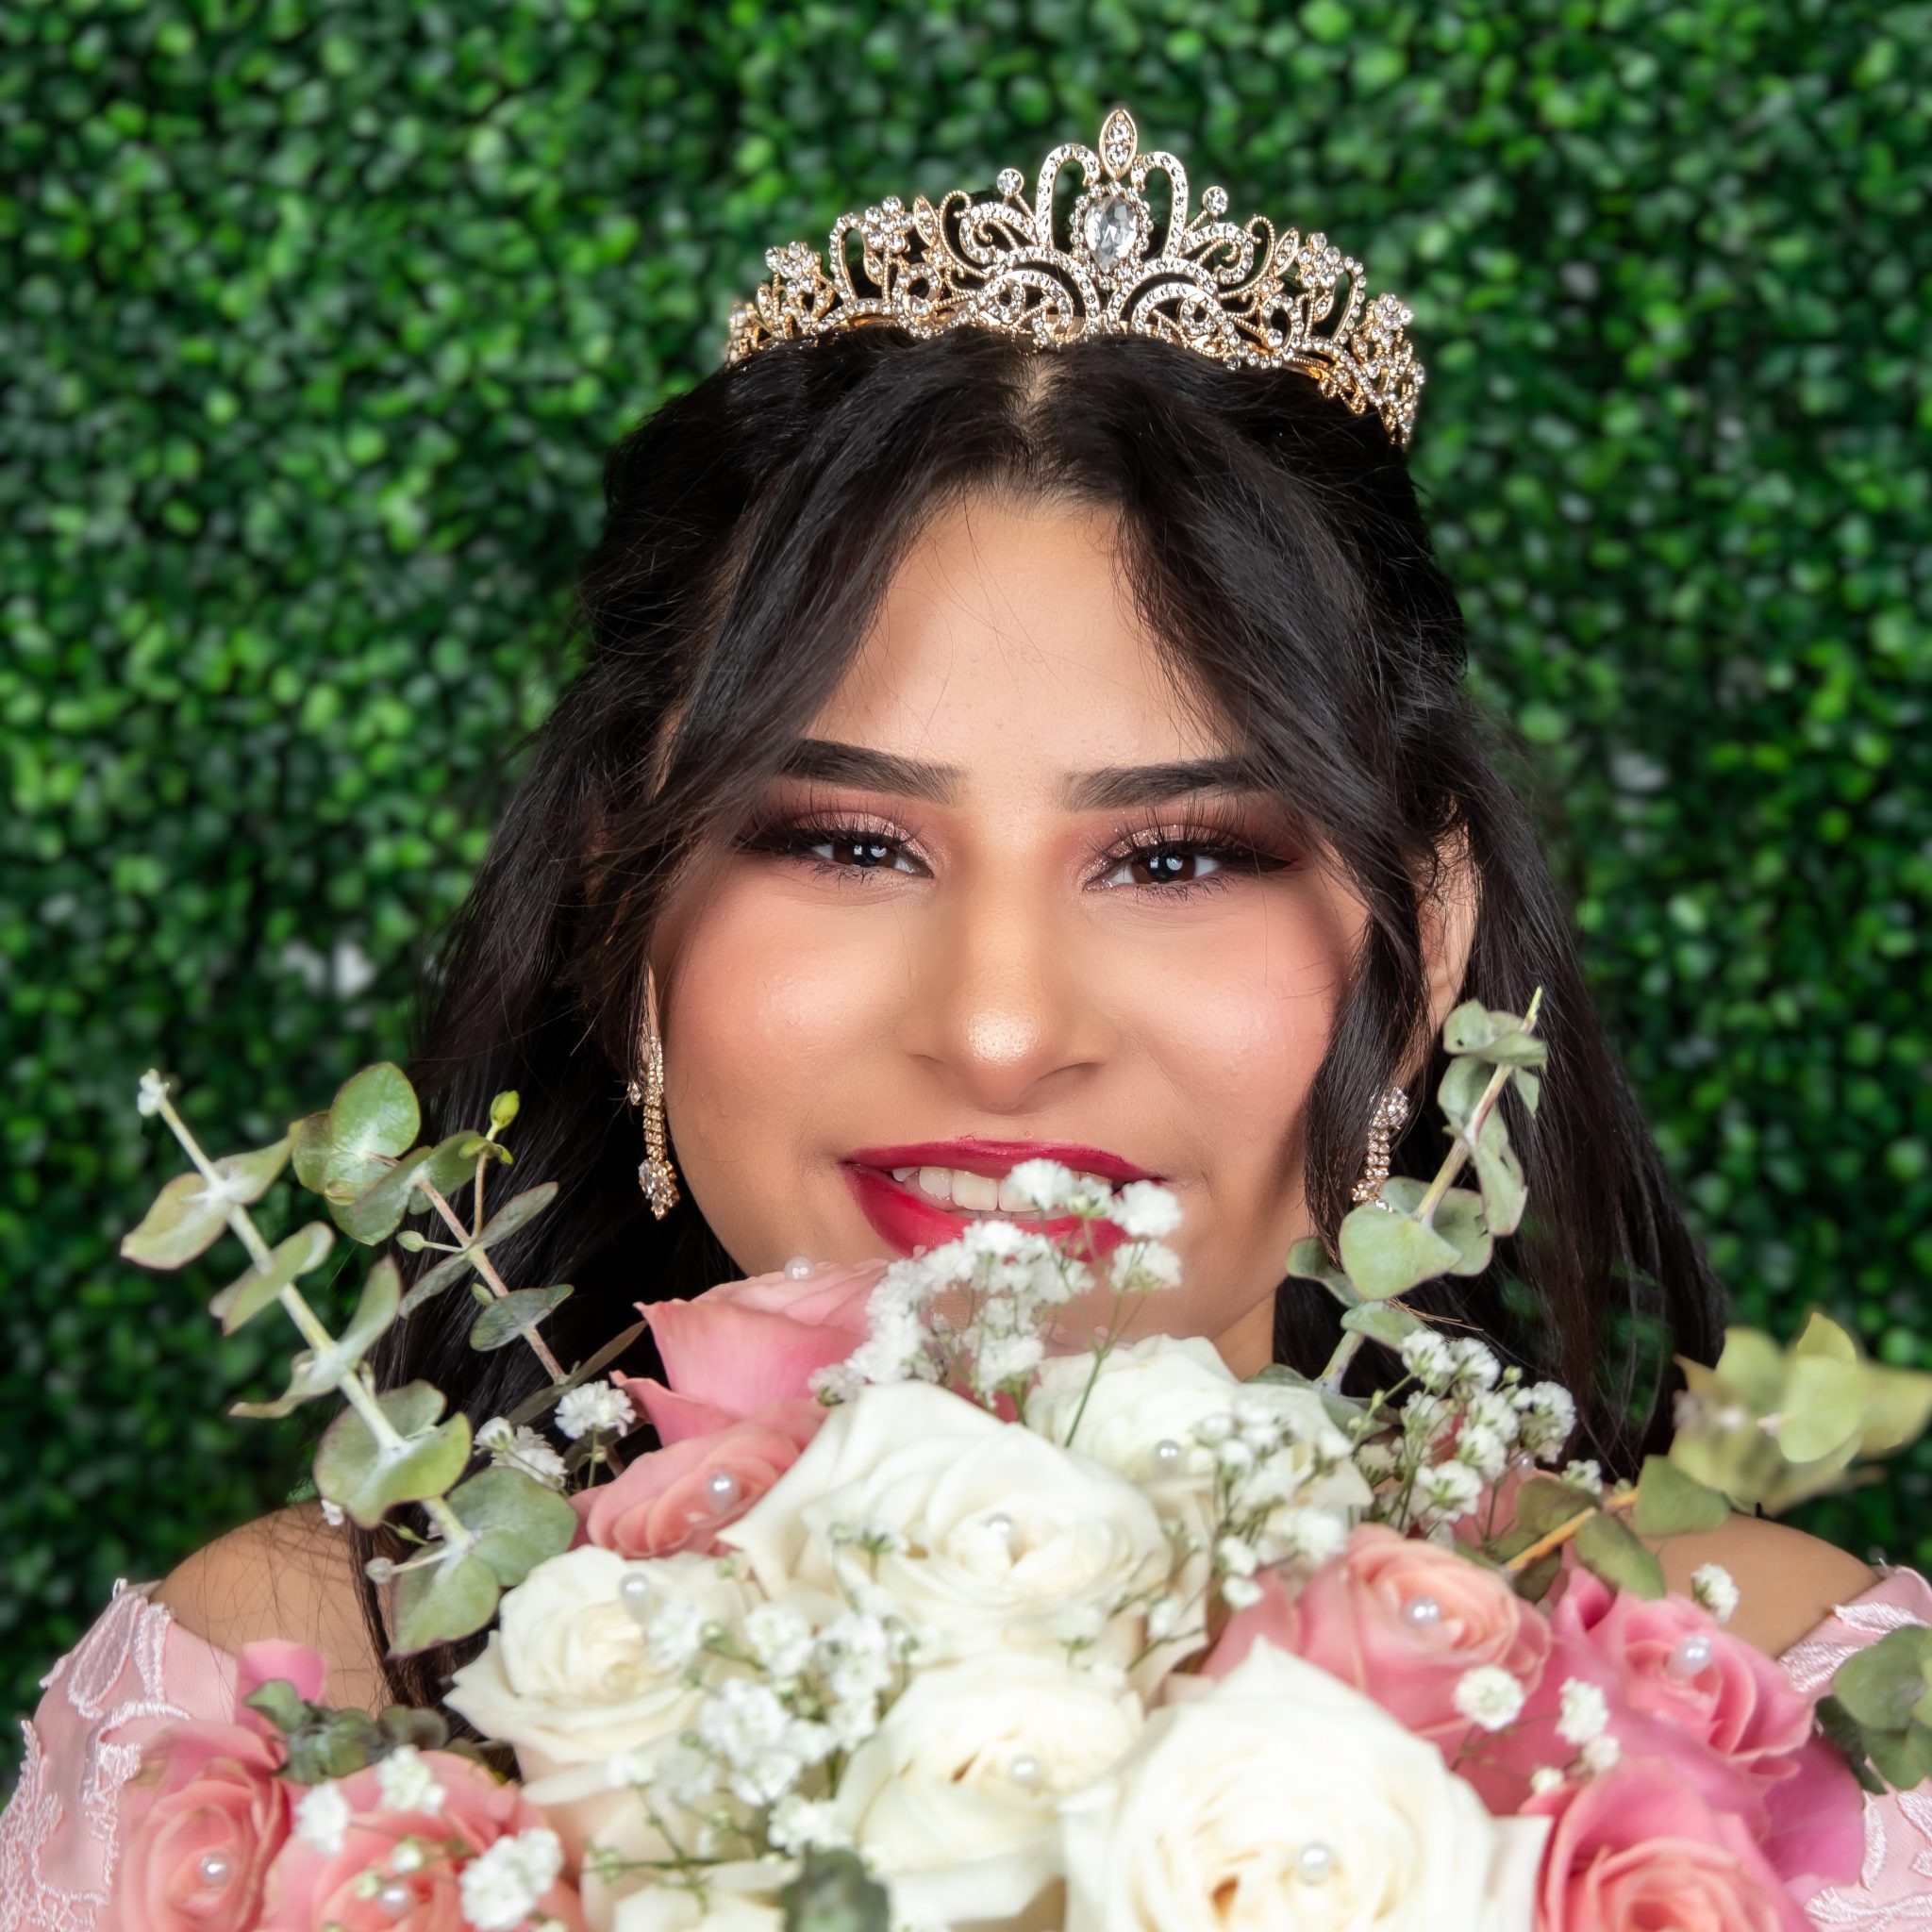 Photographers of Las Vegas Photographers Of Las Vegas Photographers of Las Vegas focus of every shoot is capturing your vision. We work together to bring your memories to life. 11